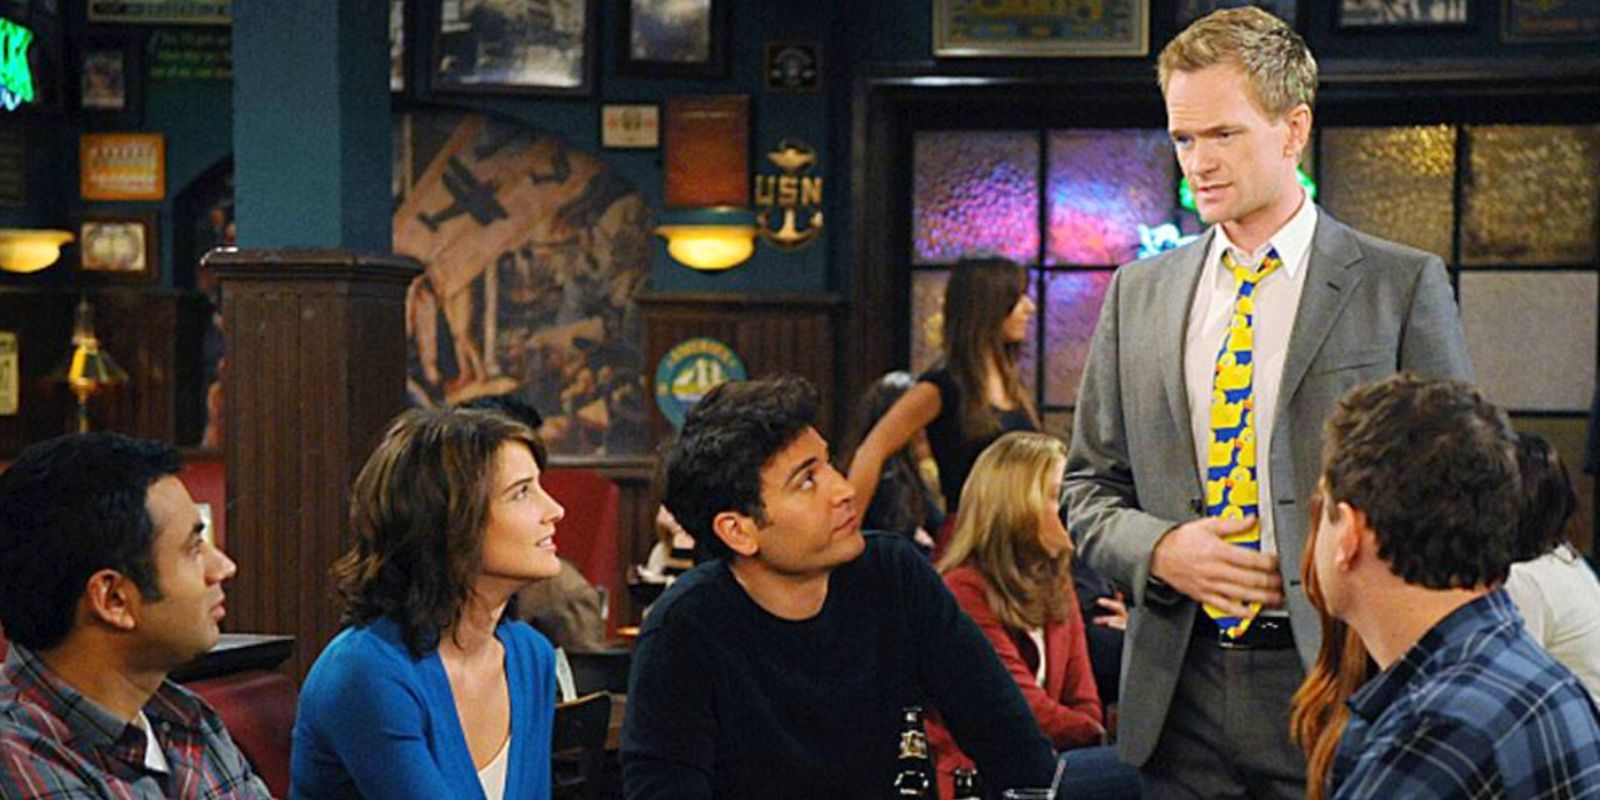 Barney wears the ducky tie in front of the group in How I Met Your Mother